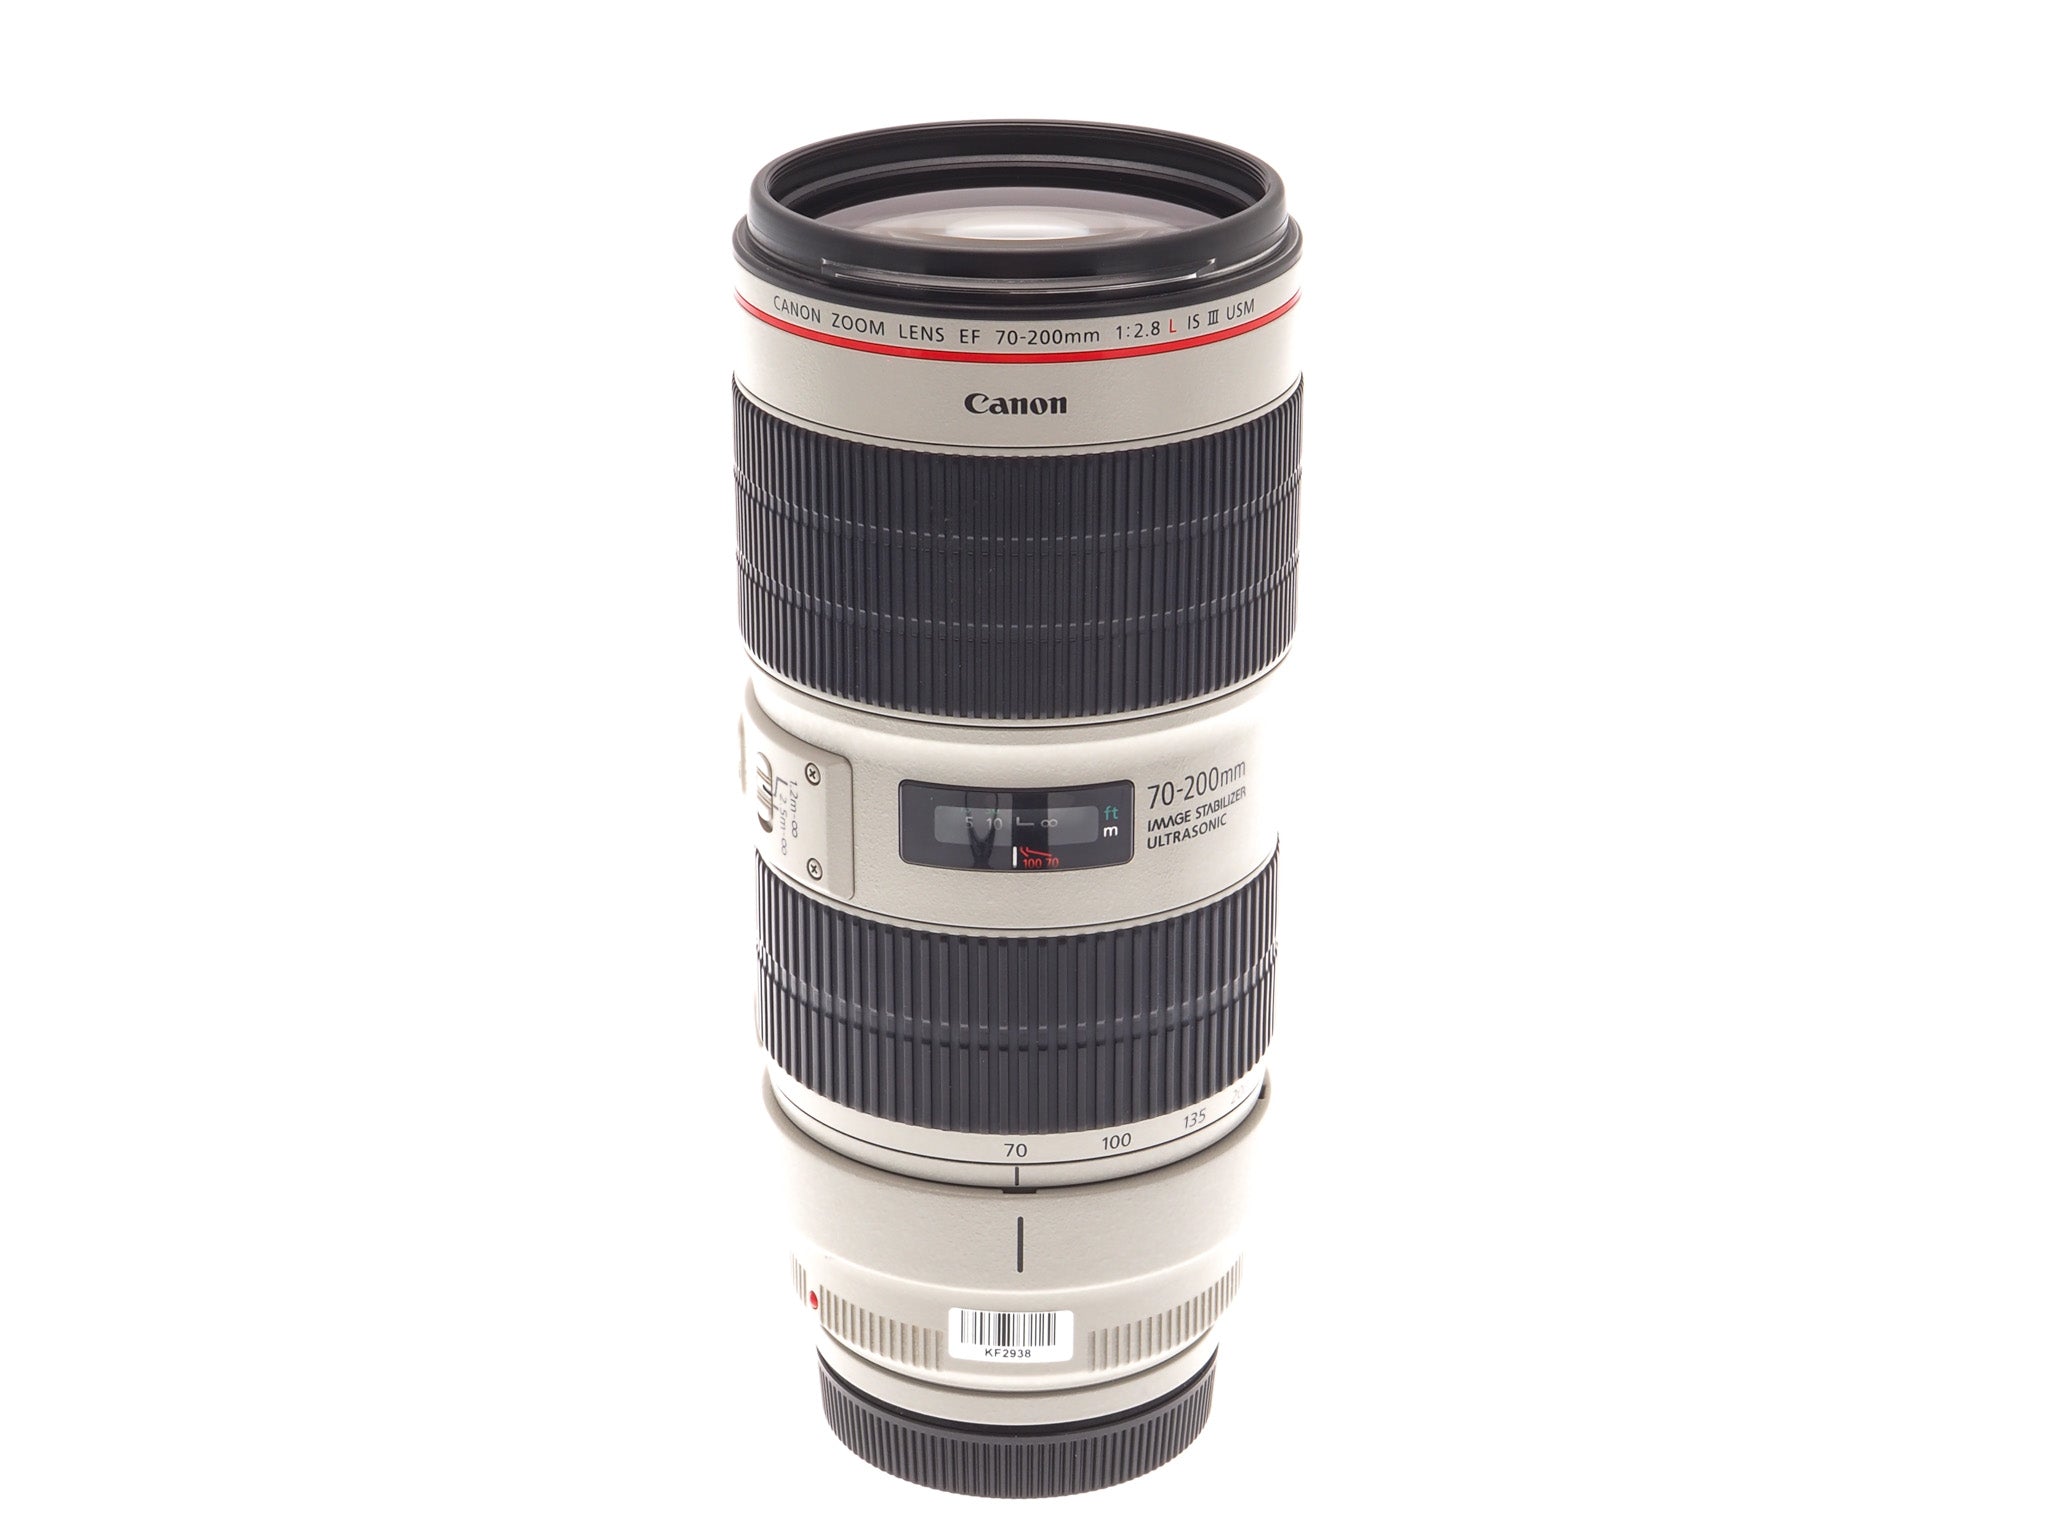 Canon 70-200mm f2.8 L IS III USM - Lens